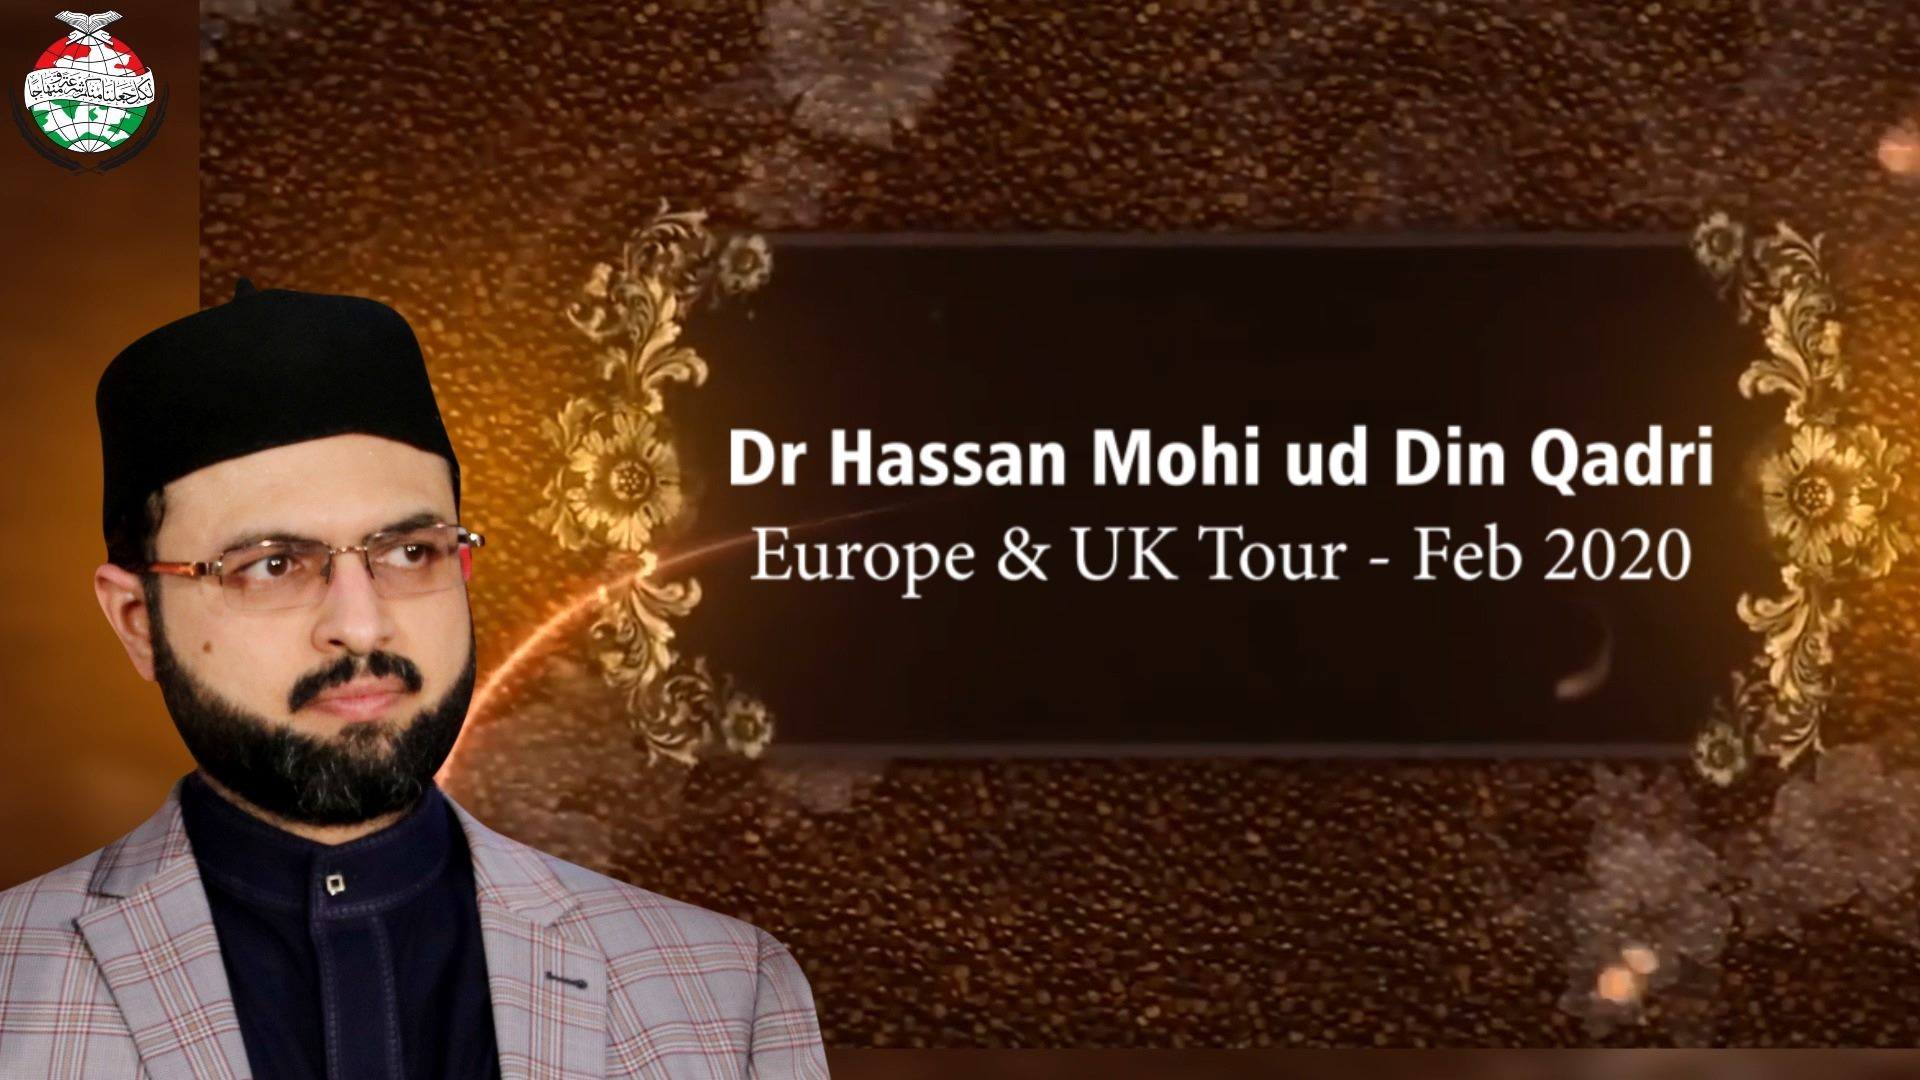 Highlights of Dr Hassan Mohi-ud-Din Qadri's organizational tour to Europe & UK 2020